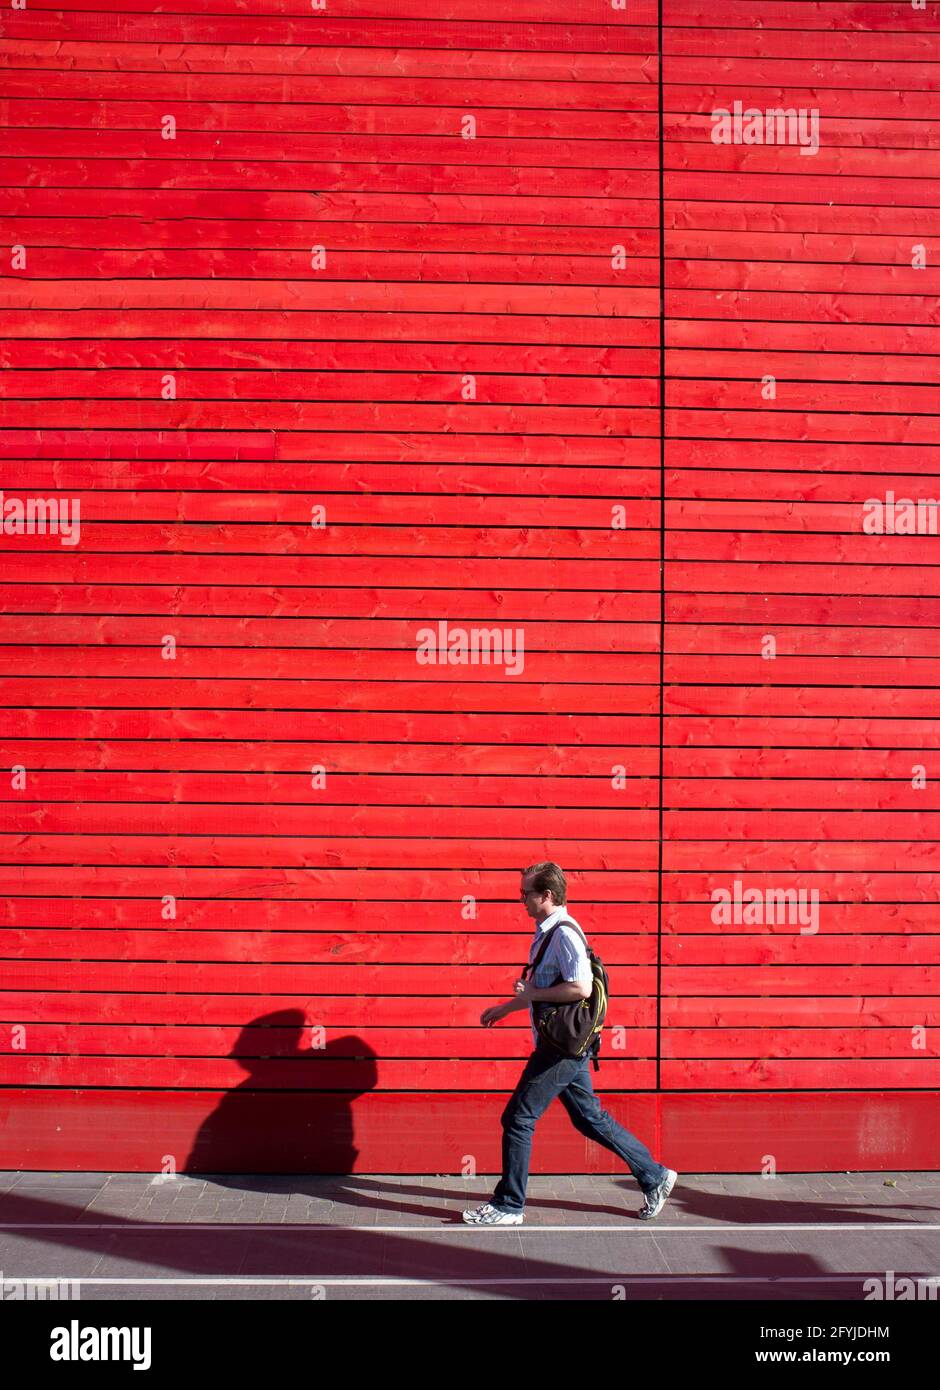 Sideview of a man, with a rucksack bag, walking past a red wooden wall with his shadow on it on a warm sunny day Stock Photo